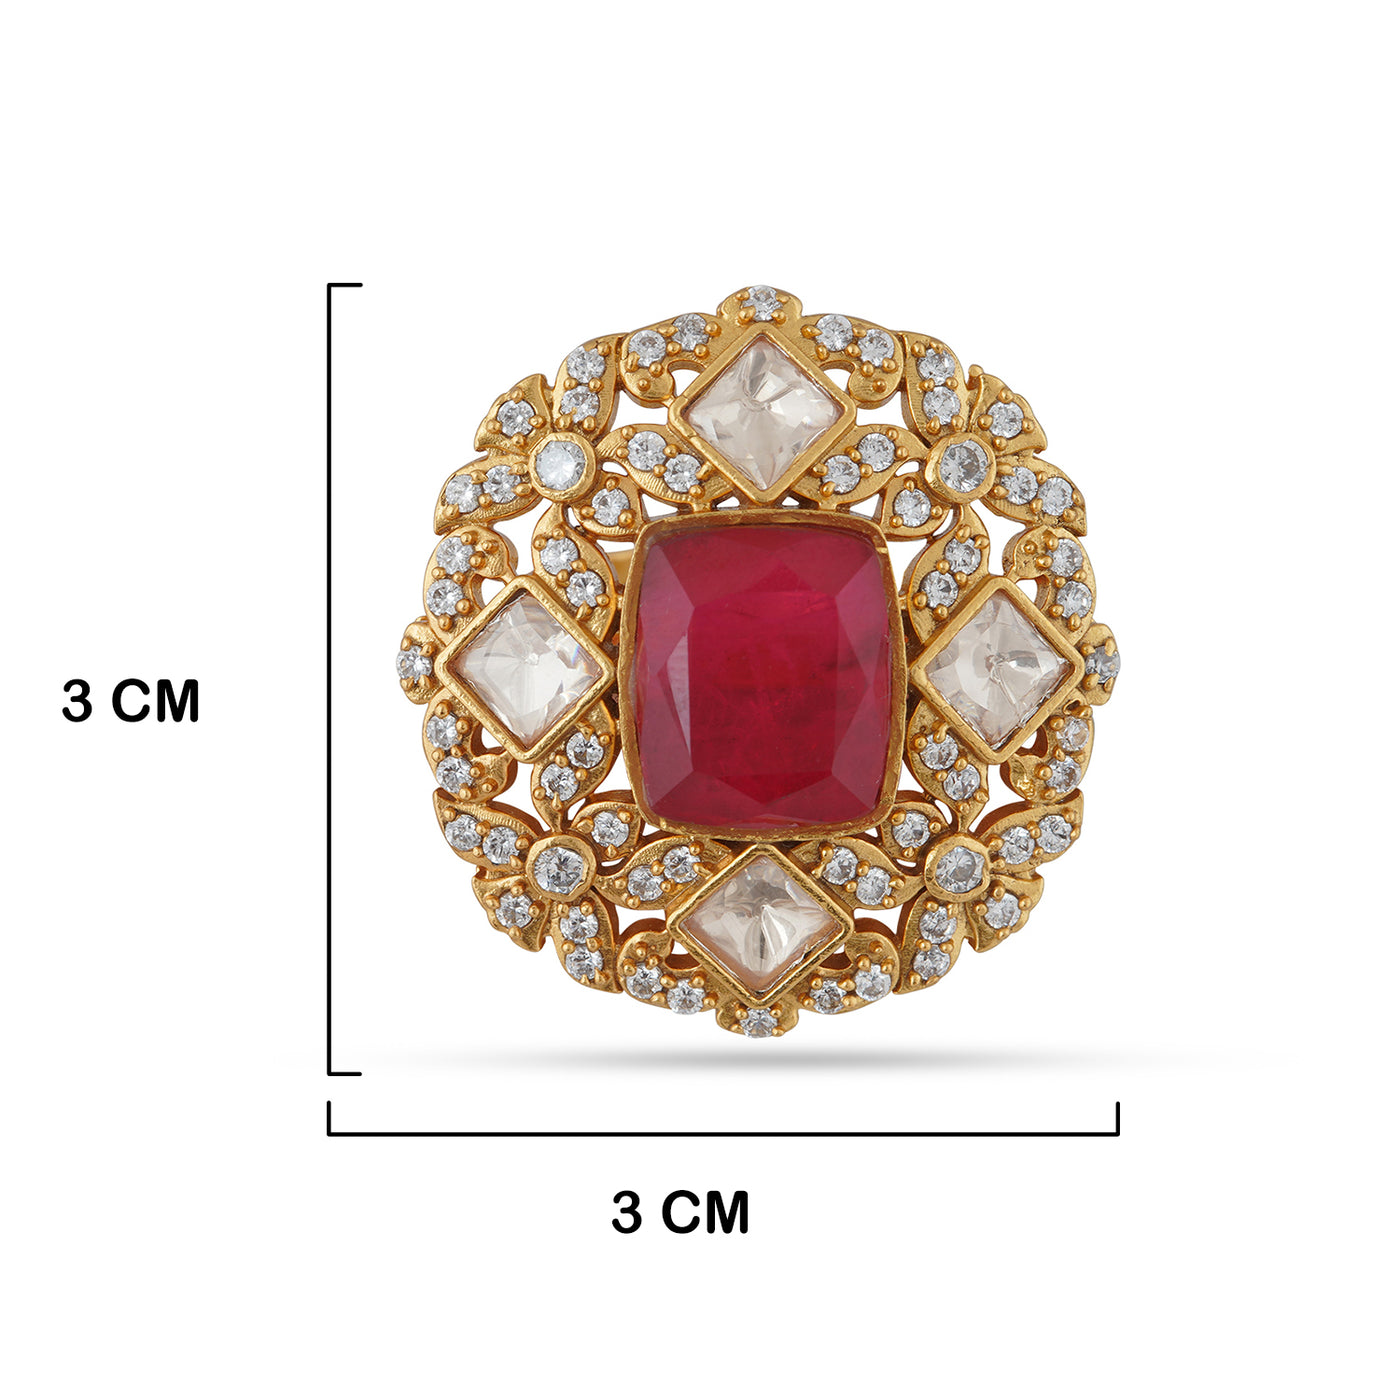 Ruby Gold Ring with measurements in cm. 3cm by 3cm.